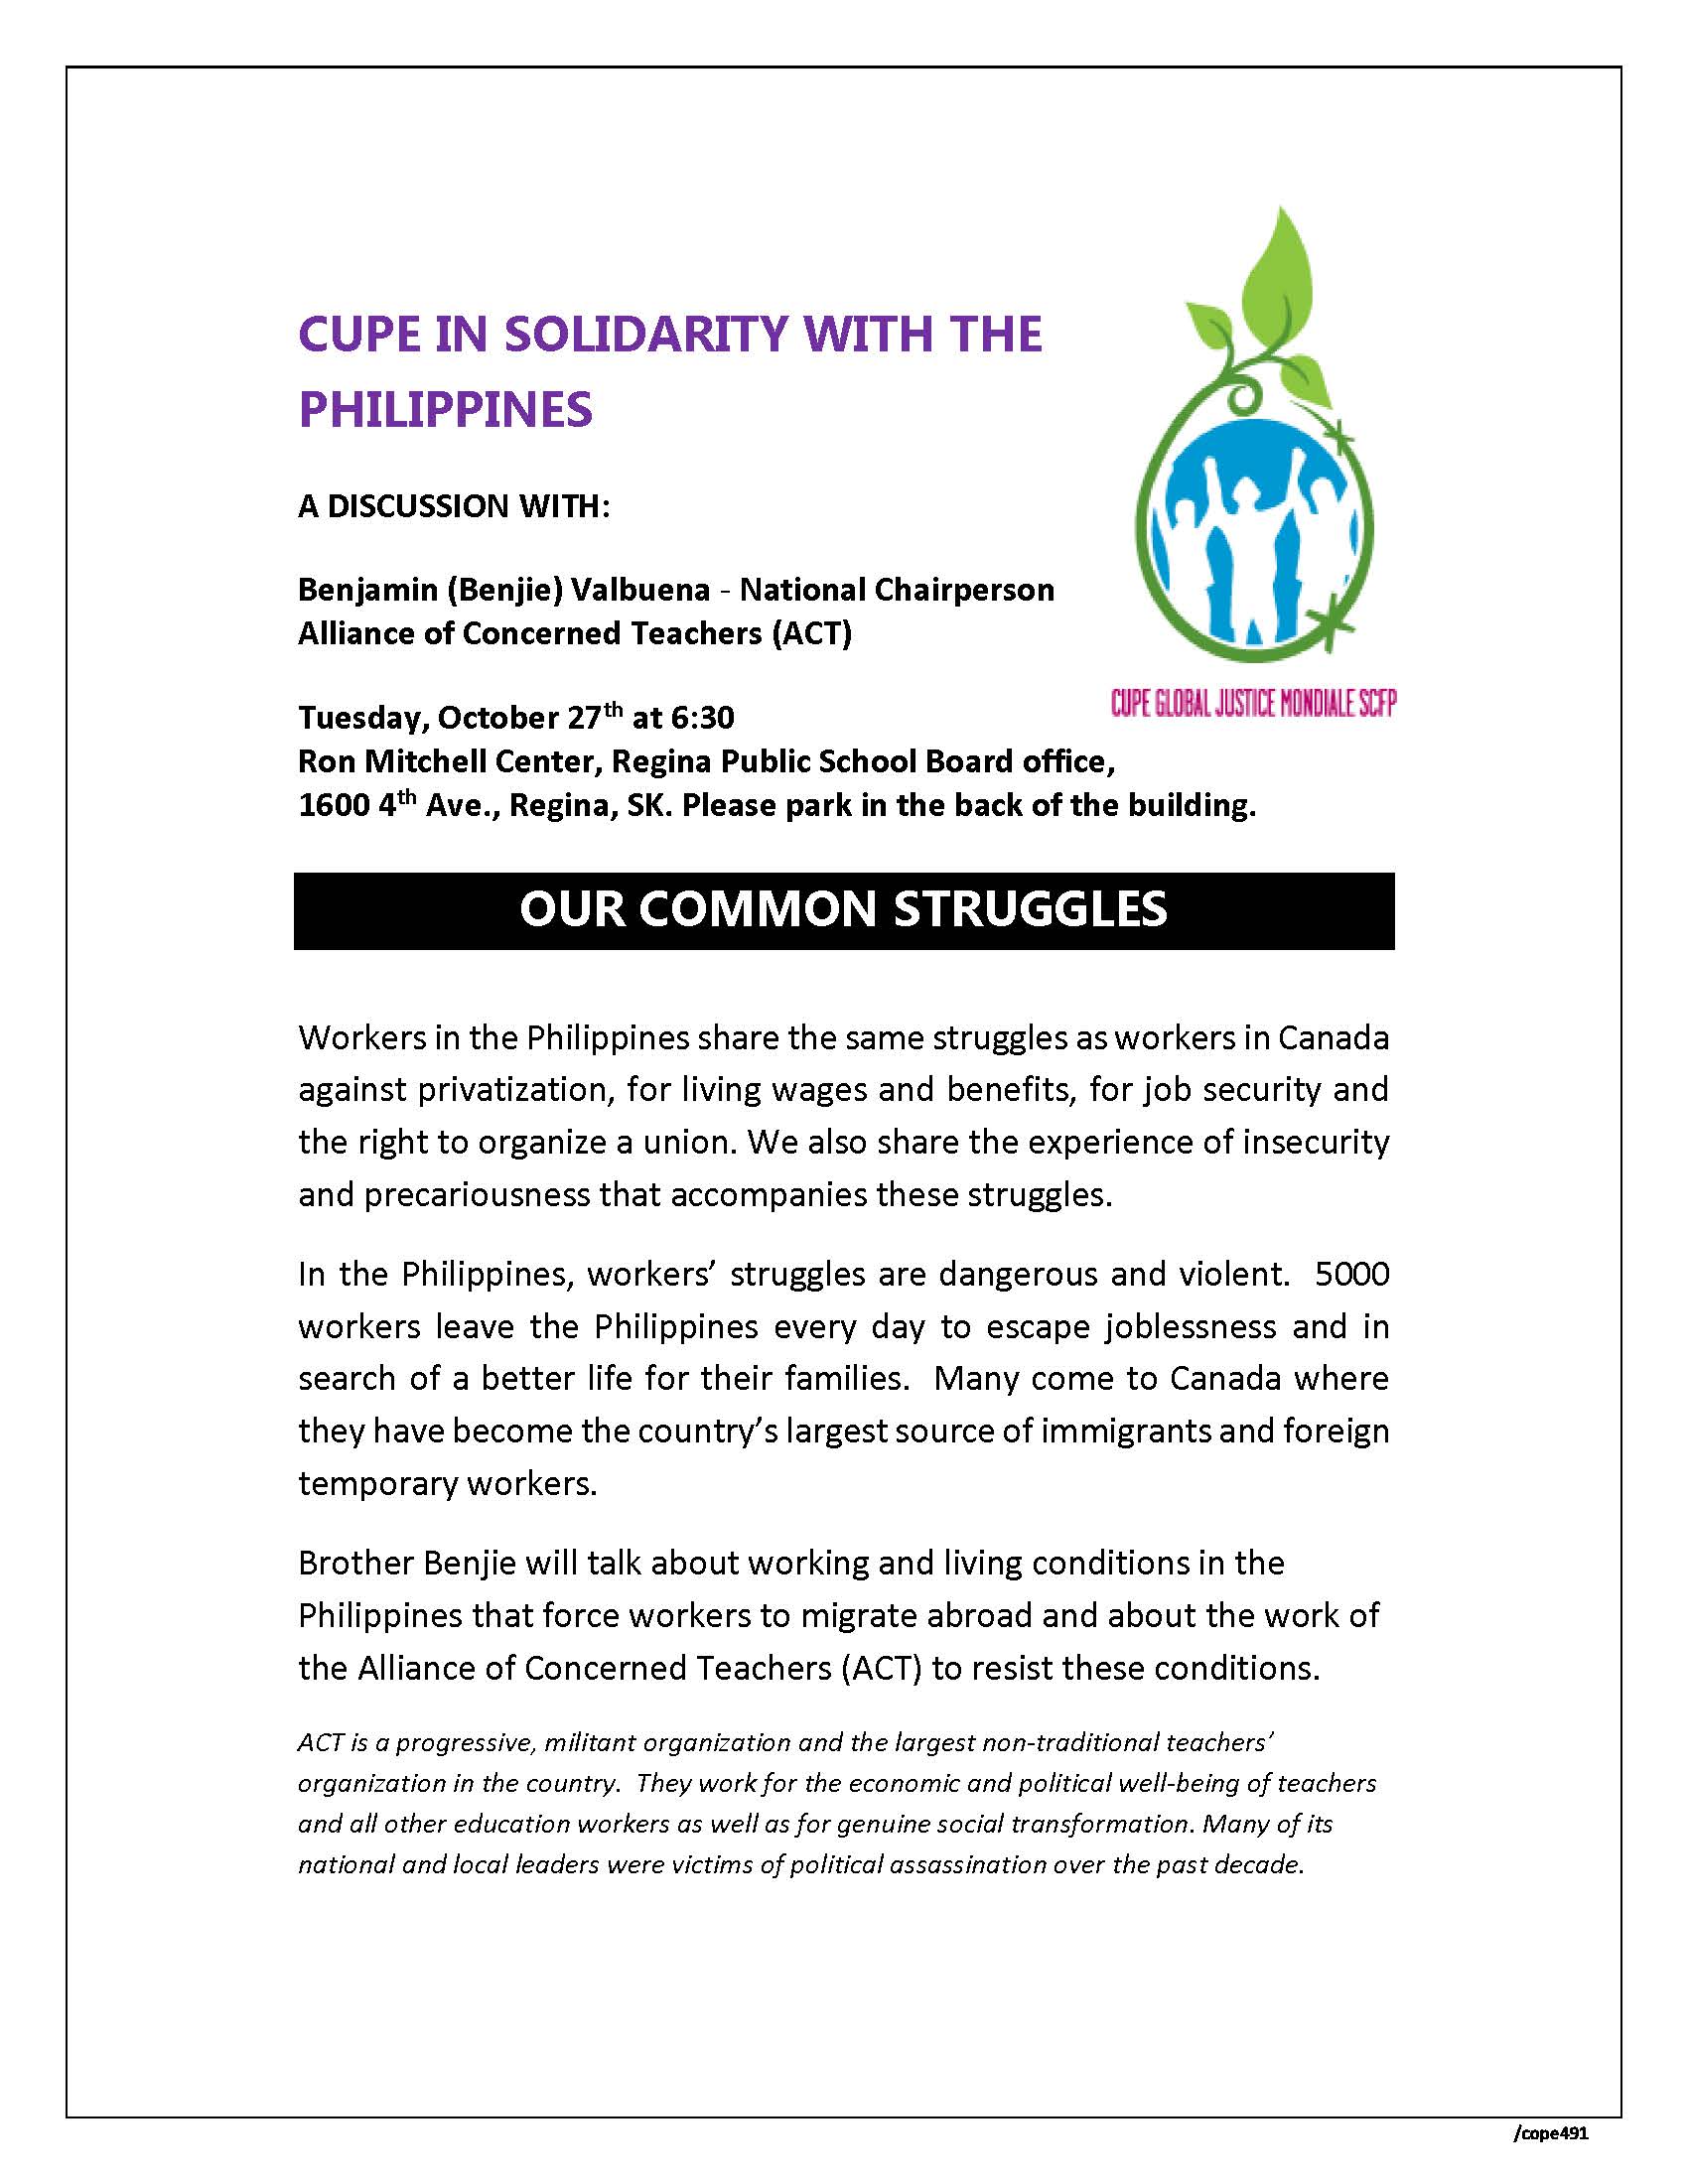 CUPE in Solidarity with the Philippines